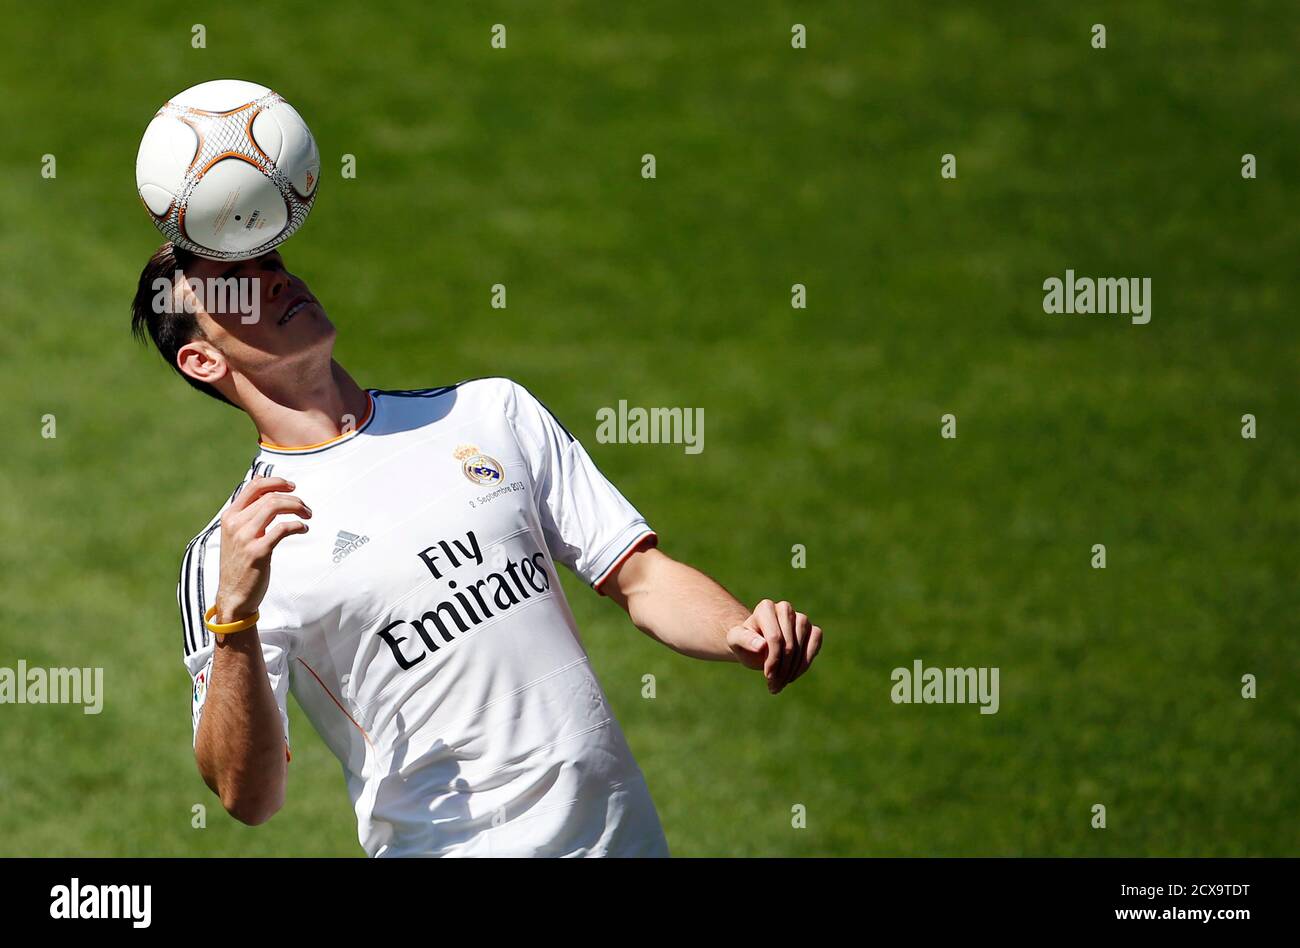 Gareth Bale Of Wales Heads The Ball During His Presentation As A New Real Madrid Player At The Santiago Bernabeu Stadium In Madrid September 2 13 Thousands Of Real Madrid Fans Flocked